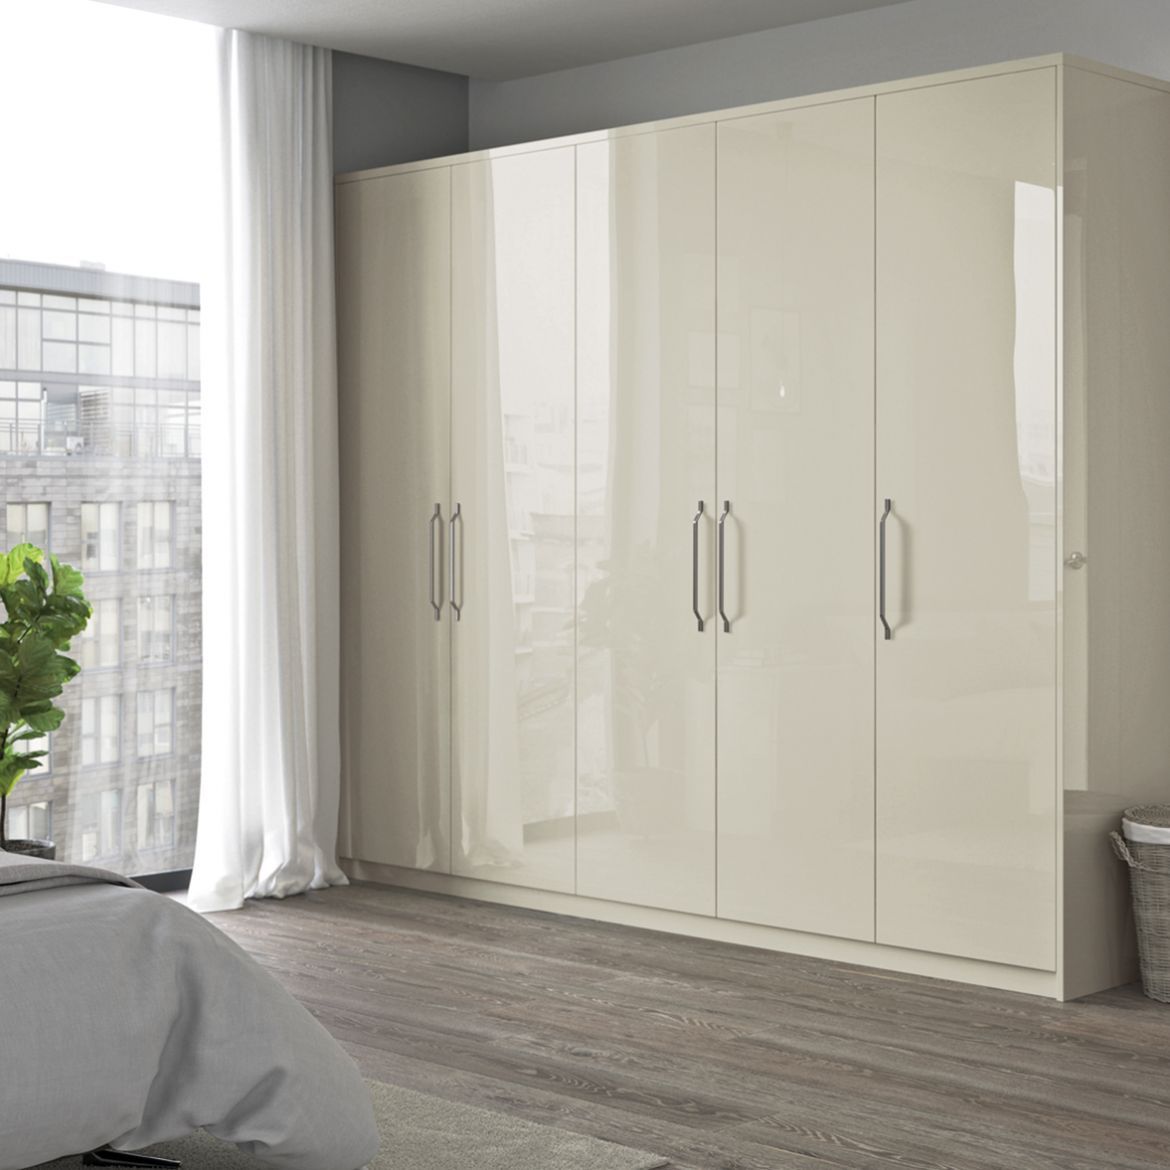 Reflections Wardrobe | Cash & Carry Kitchens In Gloss Wardrobes (Photo 14 of 15)